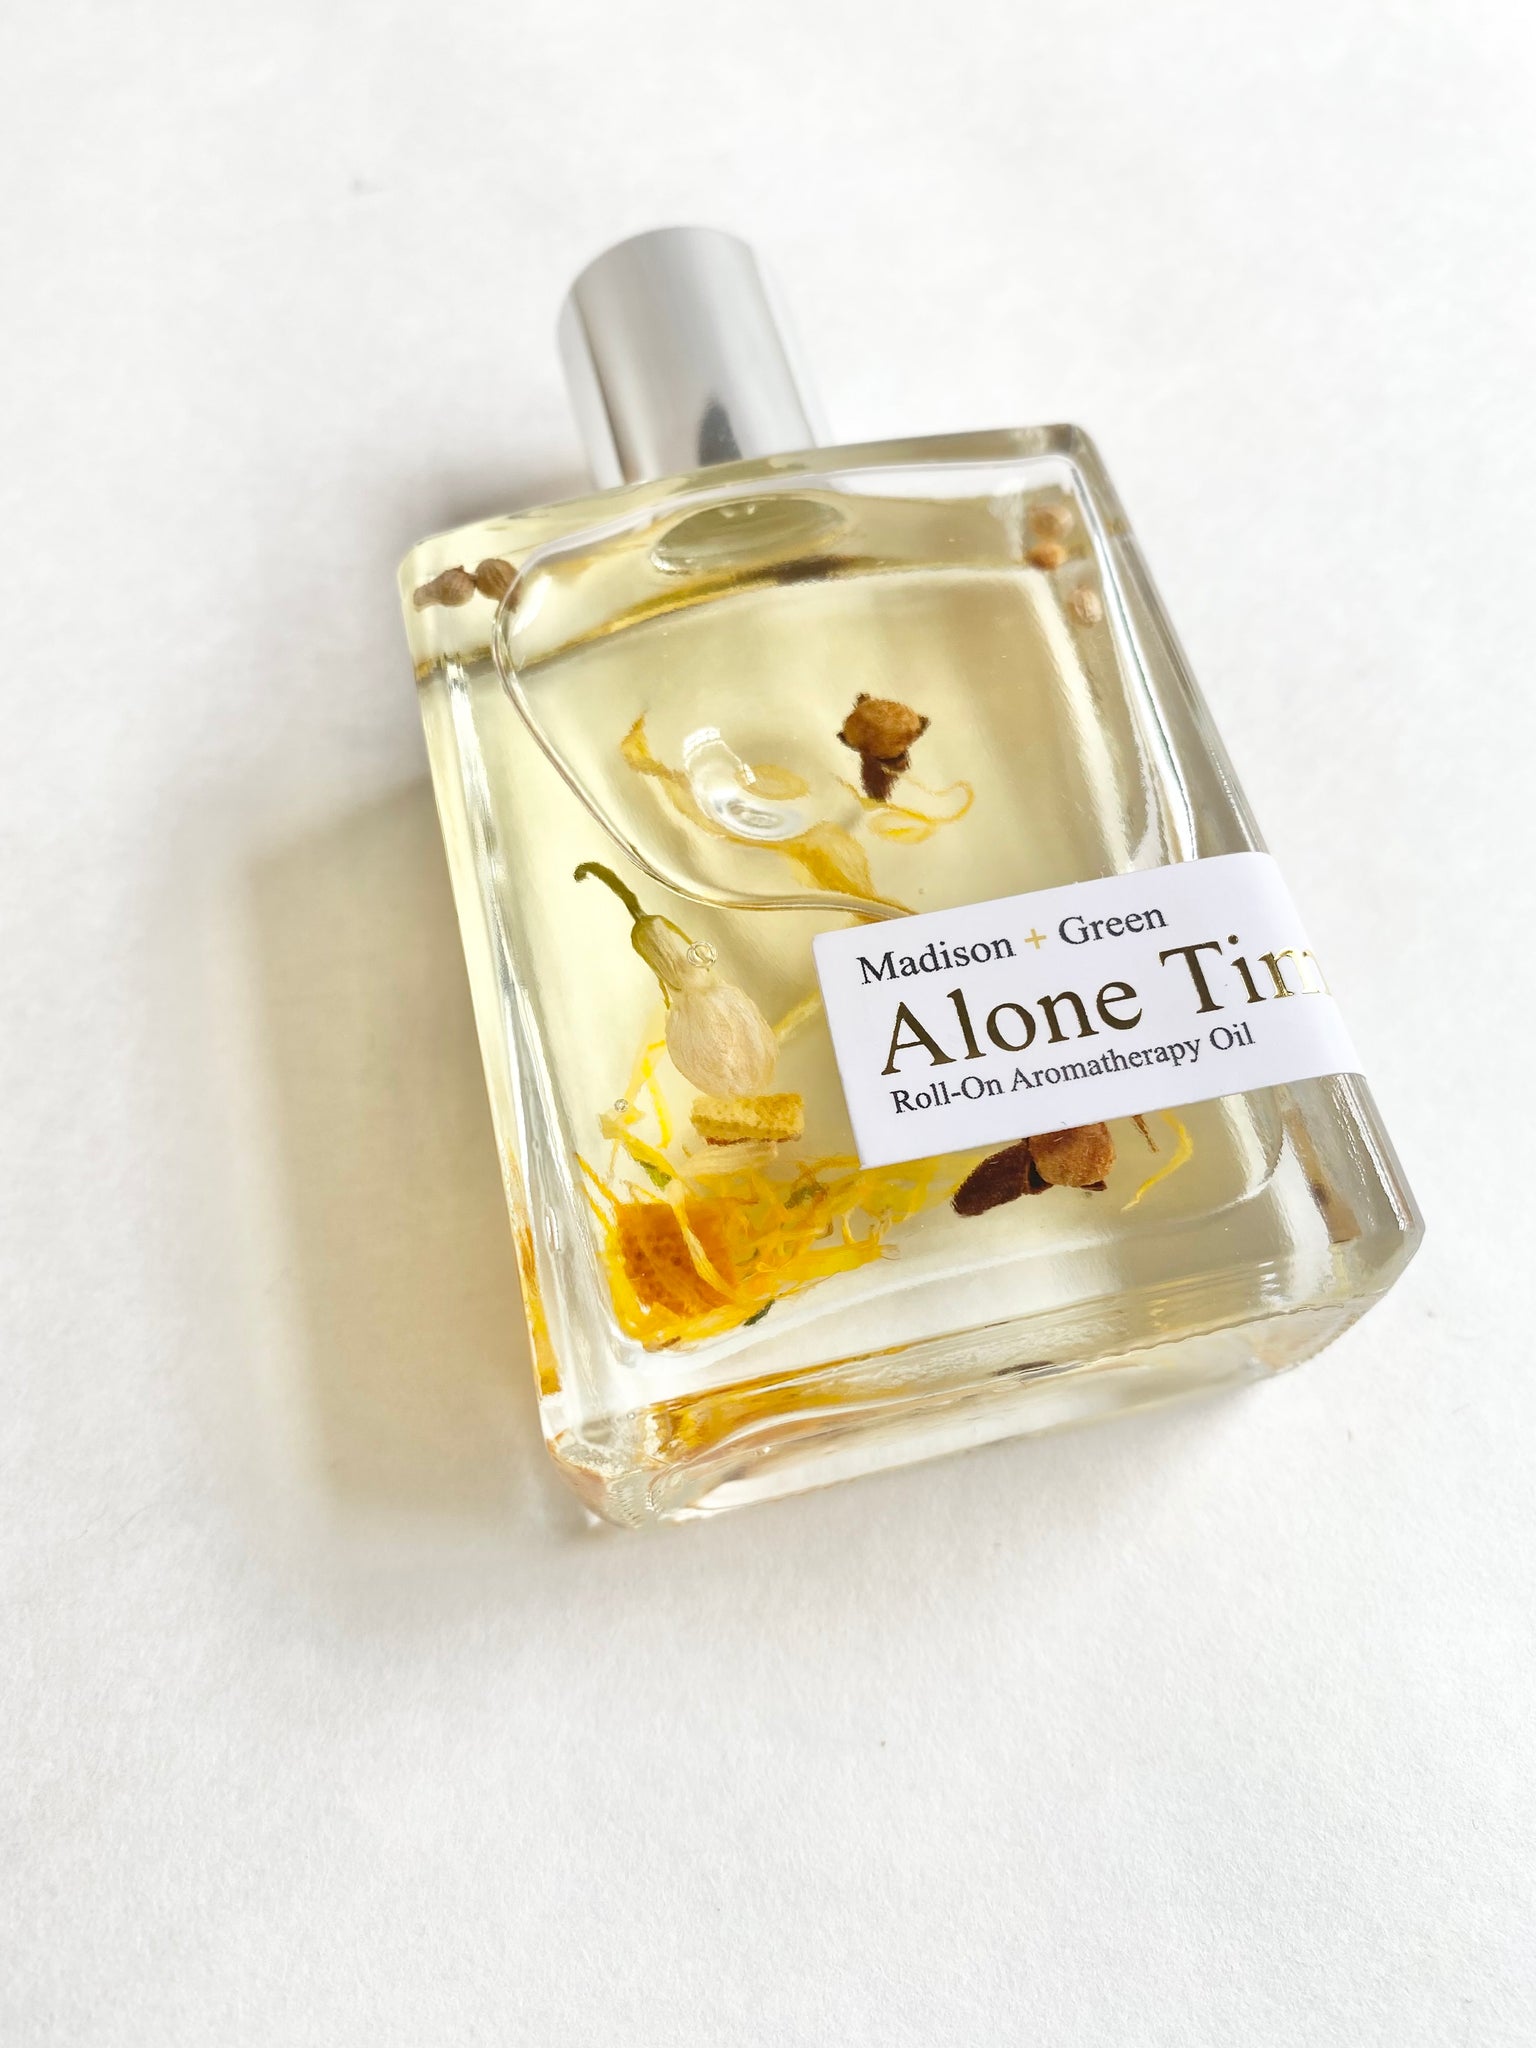 “Alone Time” Stress-Relieving Aromatherapy Body Oil